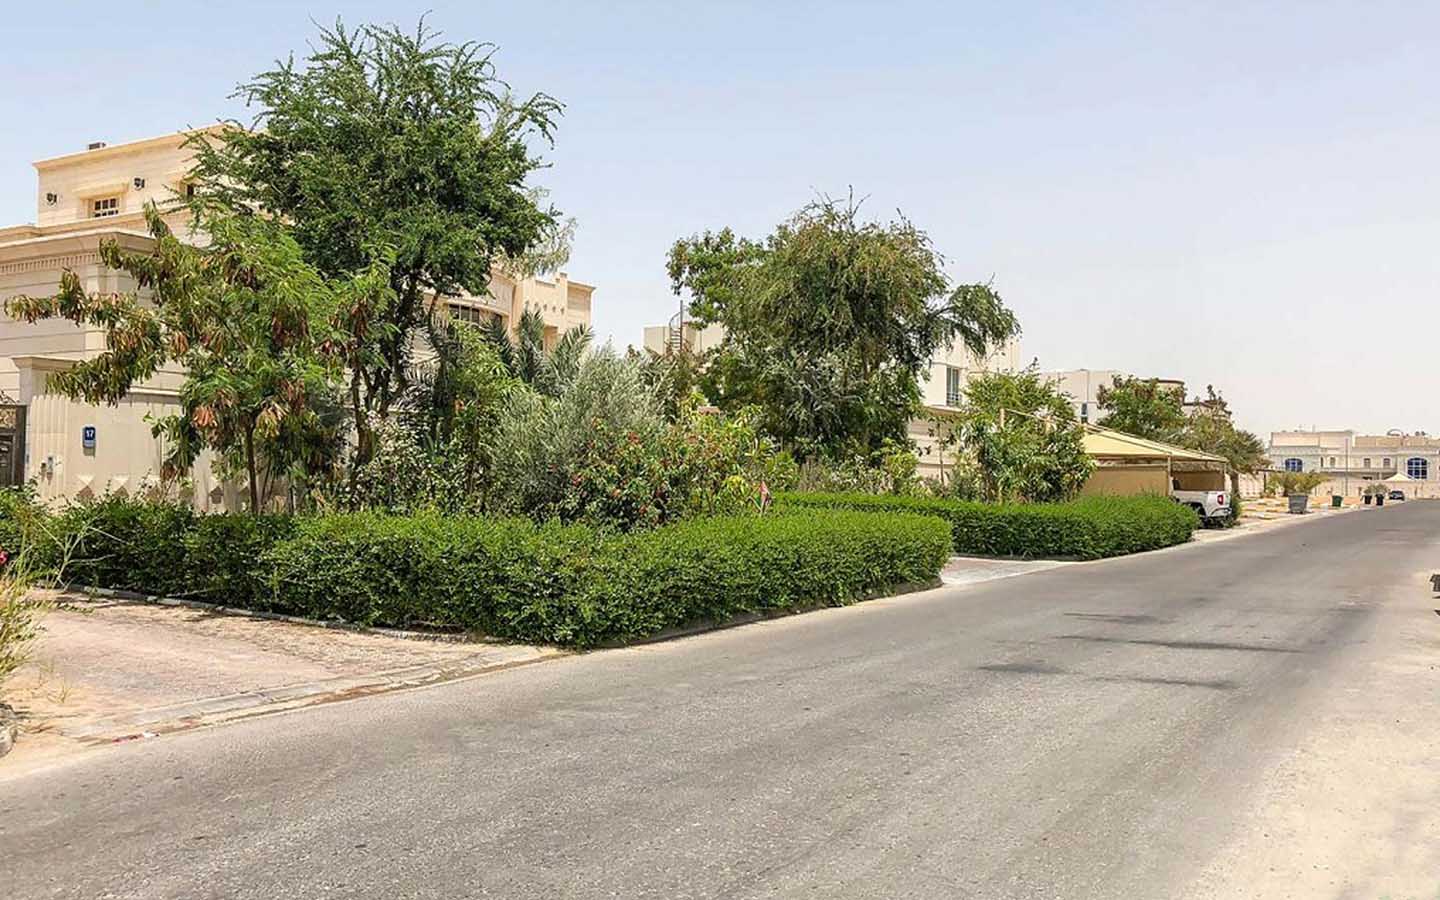 Khalifa City is also popular among those looking to buy affordable villas according to the Abu Dhabi sales market report for 2023